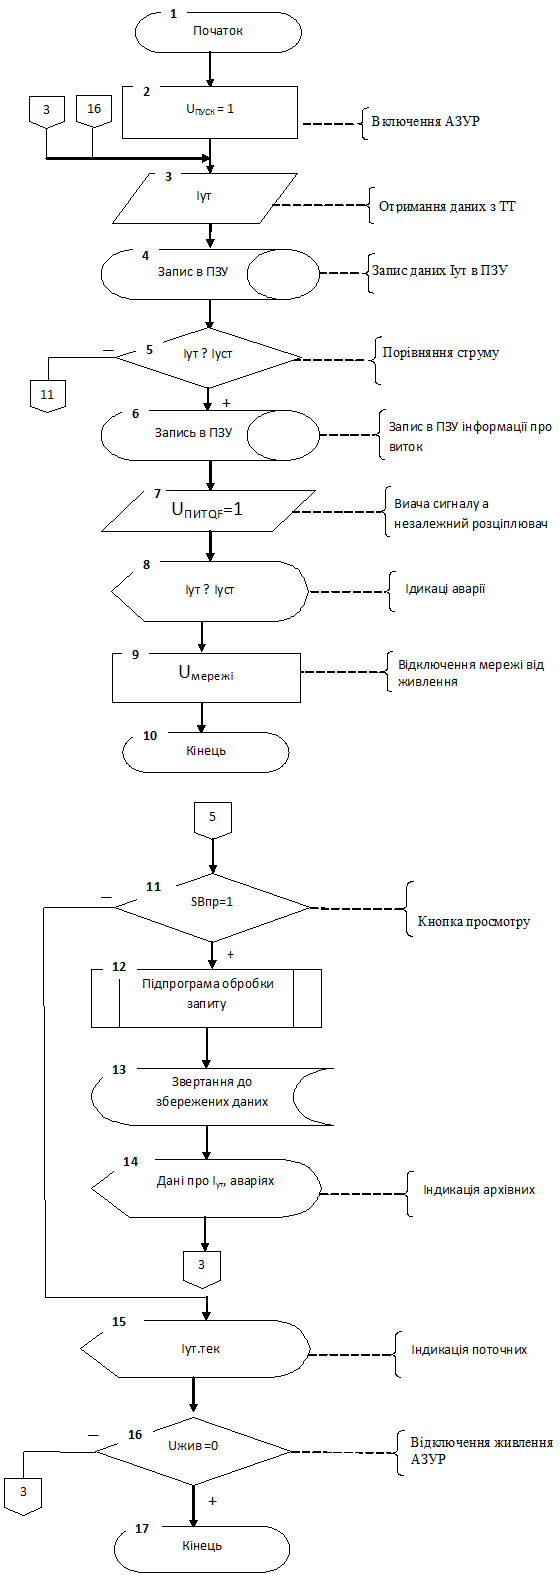 Figure 1 — Algorithm of work of the block of memory and indication.